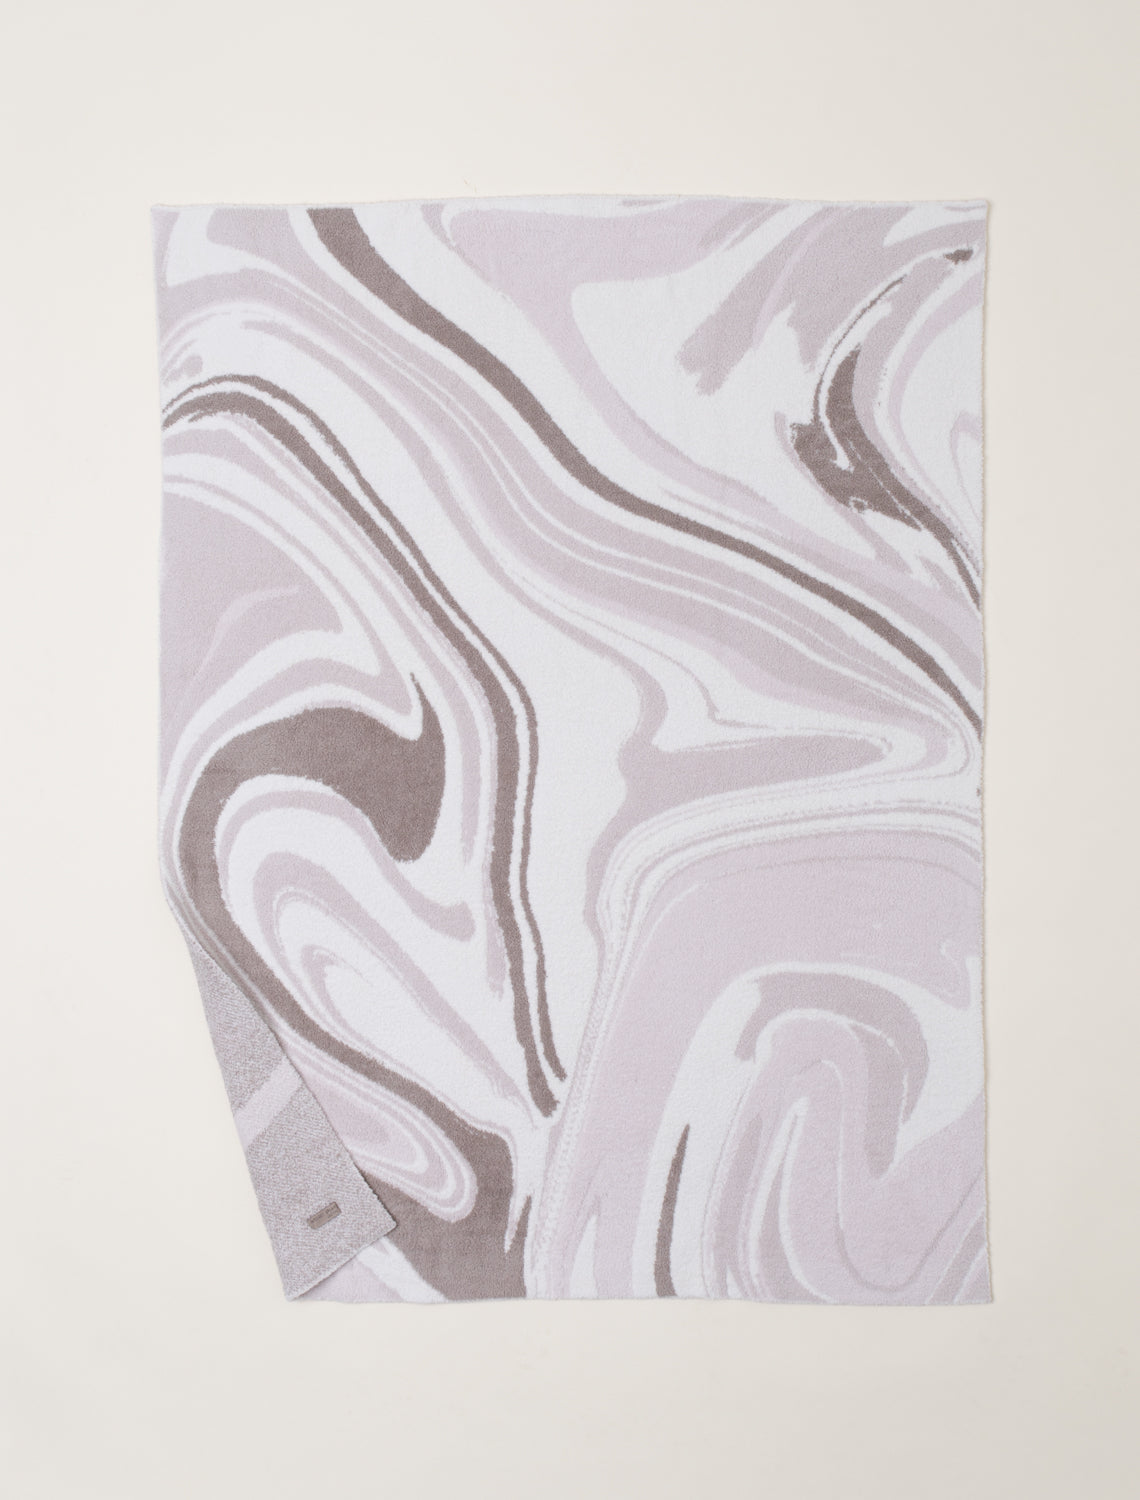 Barefoot Dreams CozyChic® Marbled Blanket-Sand Multi